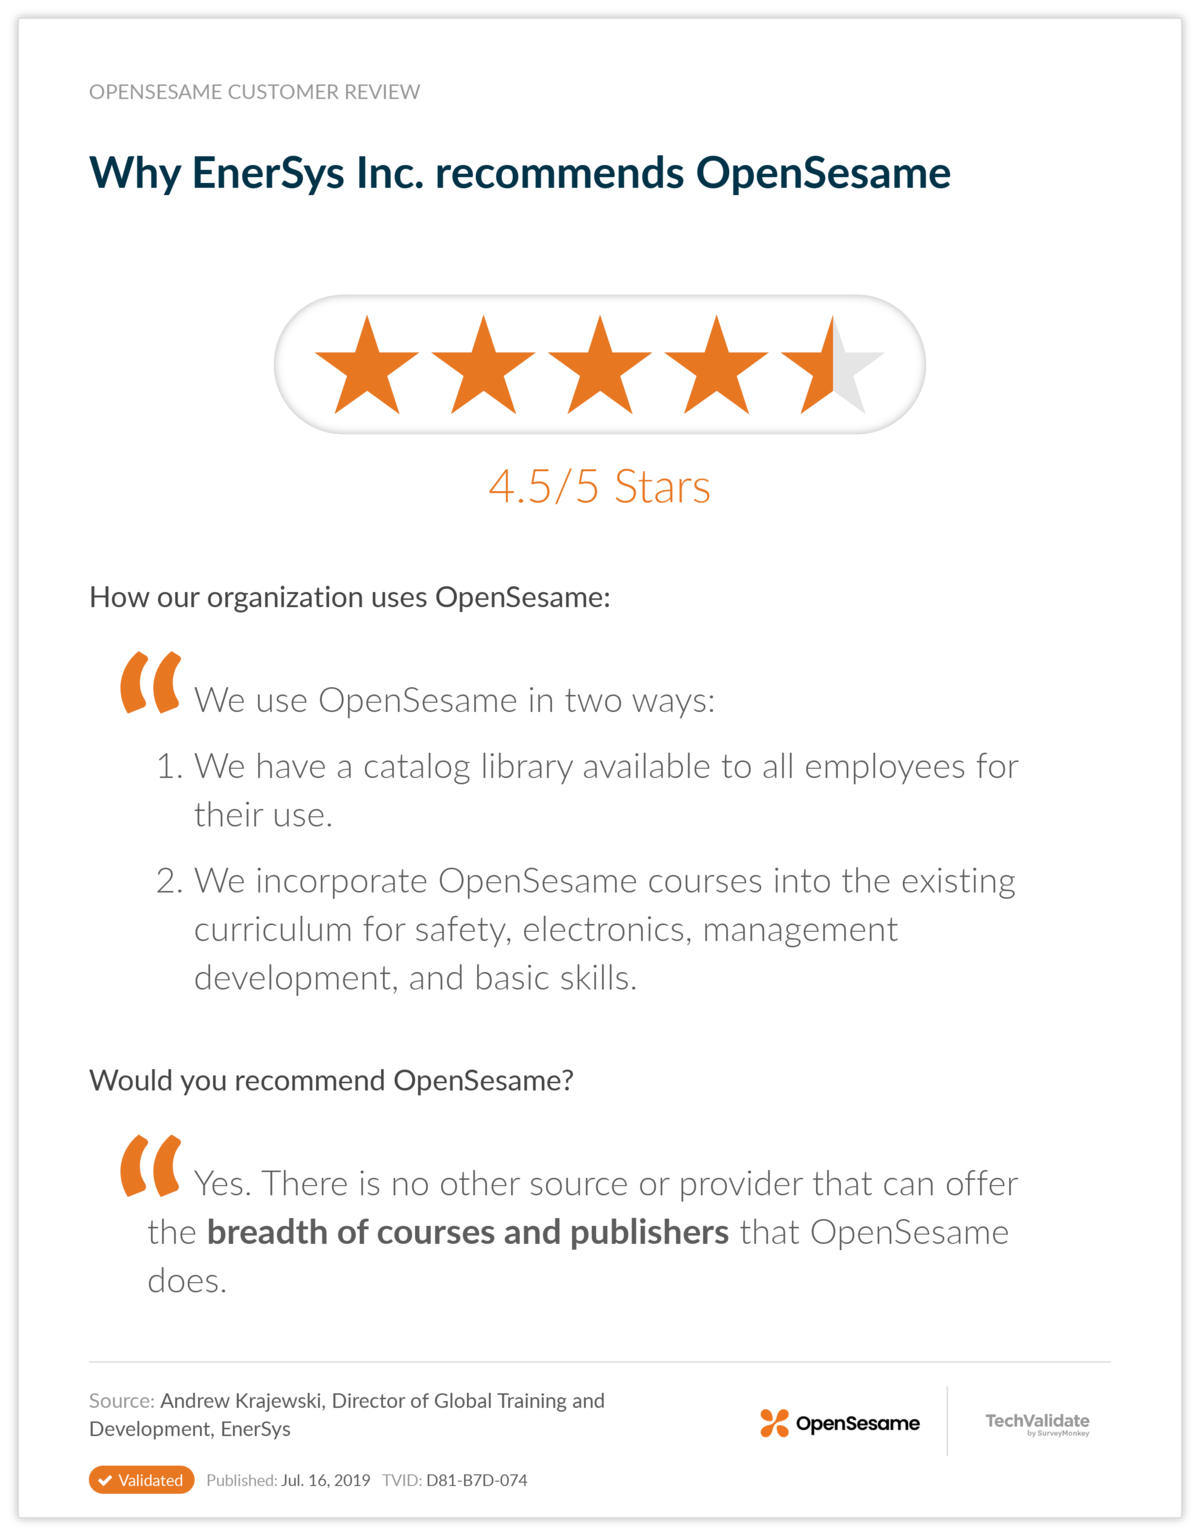 Why EnerSys Inc. recommends OpenSesame